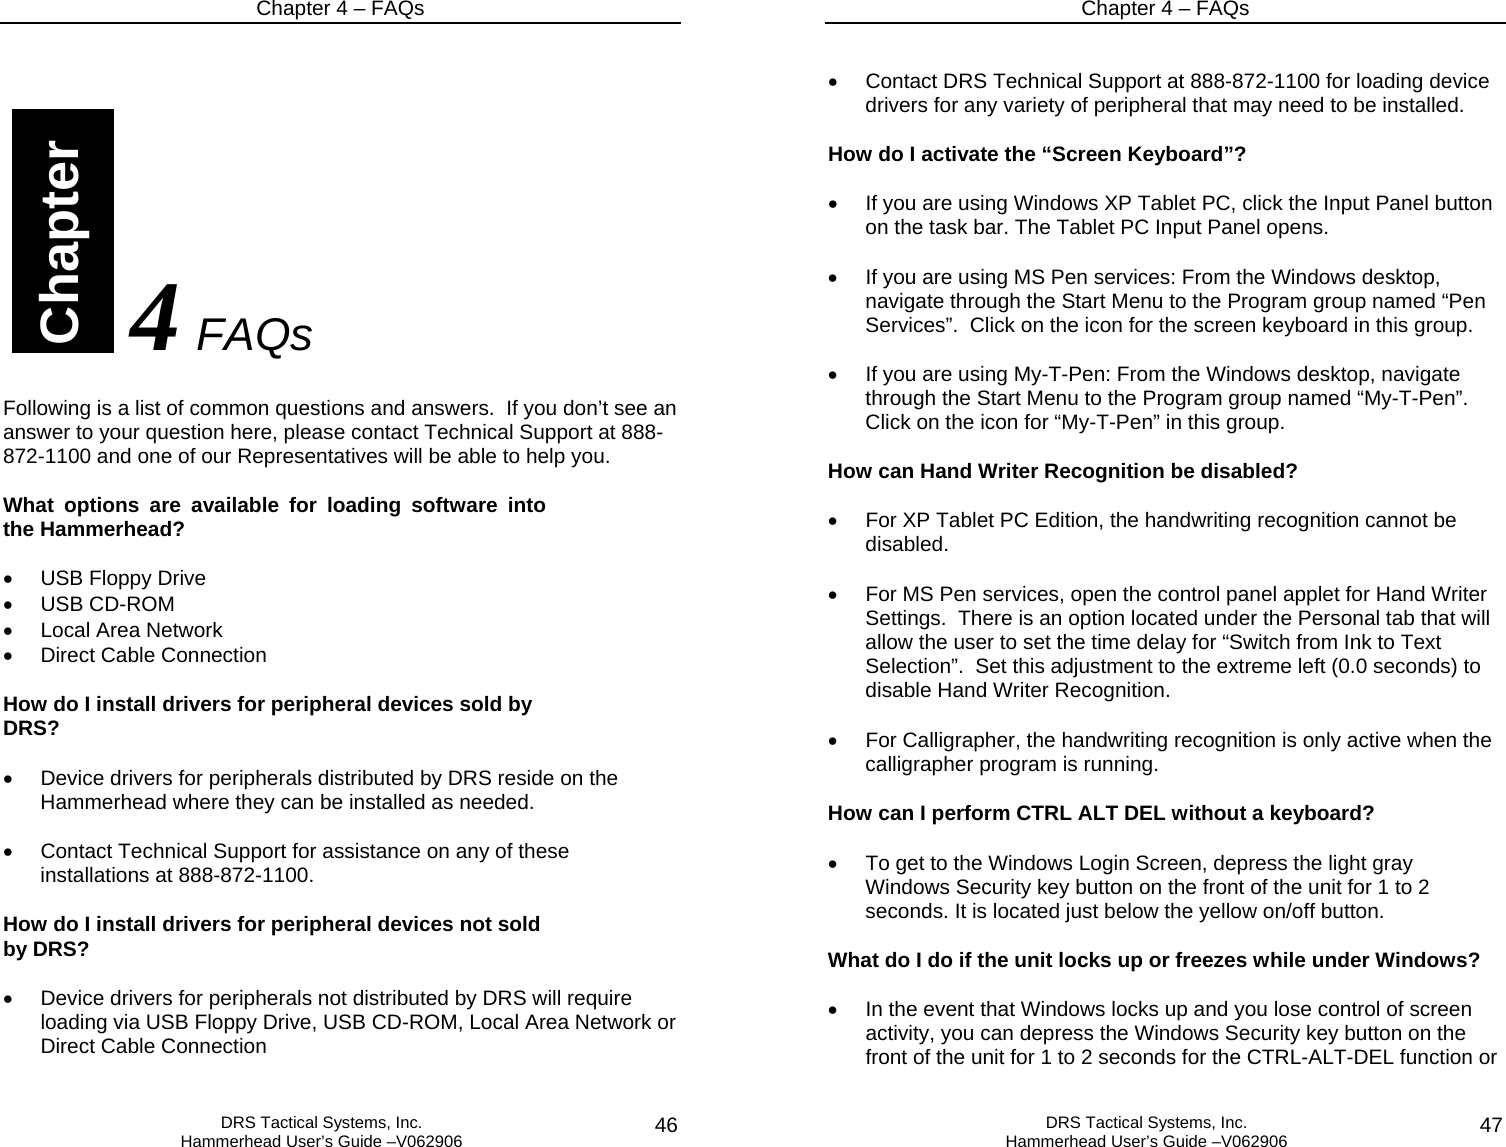 Chapter 4 – FAQs   DRS Tactical Systems, Inc.  Hammerhead User’s Guide –V062906  46                             4 FAQs  Following is a list of common questions and answers.  If you don’t see an answer to your question here, please contact Technical Support at 888-872-1100 and one of our Representatives will be able to help you.  What options are available for loading software into the Hammerhead?  •  USB Floppy Drive • USB CD-ROM   •  Local Area Network •  Direct Cable Connection  How do I install drivers for peripheral devices sold by DRS?  •  Device drivers for peripherals distributed by DRS reside on the Hammerhead where they can be installed as needed.  •  Contact Technical Support for assistance on any of these installations at 888-872-1100.  How do I install drivers for peripheral devices not sold by DRS?  •  Device drivers for peripherals not distributed by DRS will require loading via USB Floppy Drive, USB CD-ROM, Local Area Network or Direct Cable Connection  Chapter Chapter 4 – FAQs   DRS Tactical Systems, Inc.  Hammerhead User’s Guide –V062906  47 •  Contact DRS Technical Support at 888-872-1100 for loading device drivers for any variety of peripheral that may need to be installed.  How do I activate the “Screen Keyboard”?  •  If you are using Windows XP Tablet PC, click the Input Panel button on the task bar. The Tablet PC Input Panel opens.  •  If you are using MS Pen services: From the Windows desktop, navigate through the Start Menu to the Program group named “Pen Services”.  Click on the icon for the screen keyboard in this group.  •  If you are using My-T-Pen: From the Windows desktop, navigate through the Start Menu to the Program group named “My-T-Pen”.  Click on the icon for “My-T-Pen” in this group.  How can Hand Writer Recognition be disabled?  •  For XP Tablet PC Edition, the handwriting recognition cannot be disabled.  •  For MS Pen services, open the control panel applet for Hand Writer Settings.  There is an option located under the Personal tab that will allow the user to set the time delay for “Switch from Ink to Text Selection”.  Set this adjustment to the extreme left (0.0 seconds) to disable Hand Writer Recognition.  •  For Calligrapher, the handwriting recognition is only active when the calligrapher program is running.  How can I perform CTRL ALT DEL without a keyboard?   •  To get to the Windows Login Screen, depress the light gray Windows Security key button on the front of the unit for 1 to 2 seconds. It is located just below the yellow on/off button.    What do I do if the unit locks up or freezes while under Windows?  •  In the event that Windows locks up and you lose control of screen activity, you can depress the Windows Security key button on the front of the unit for 1 to 2 seconds for the CTRL-ALT-DEL function or 